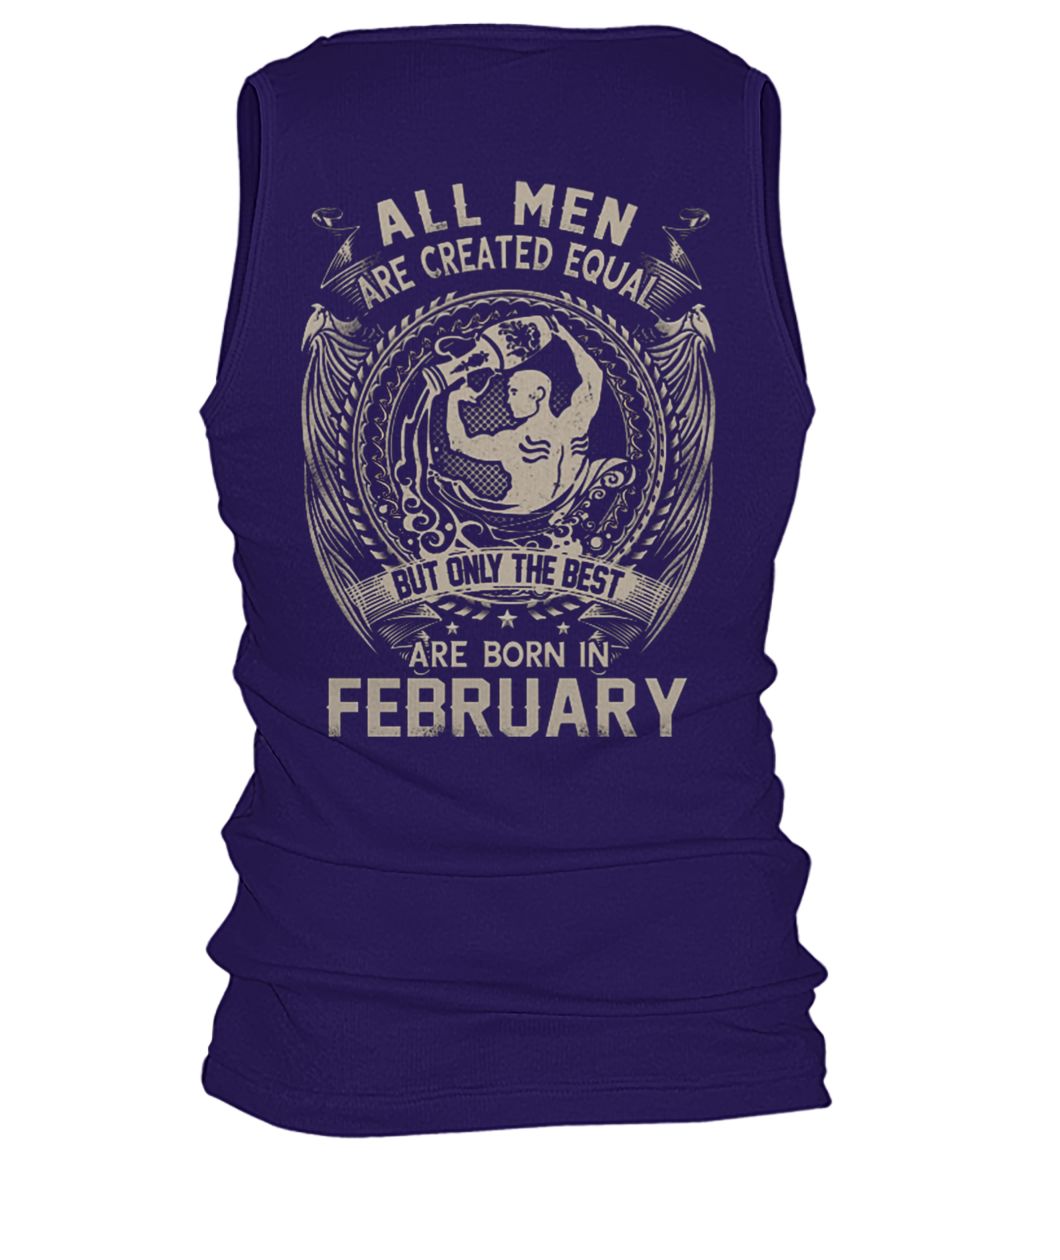 All men created equal but the best are born in february men's tank top